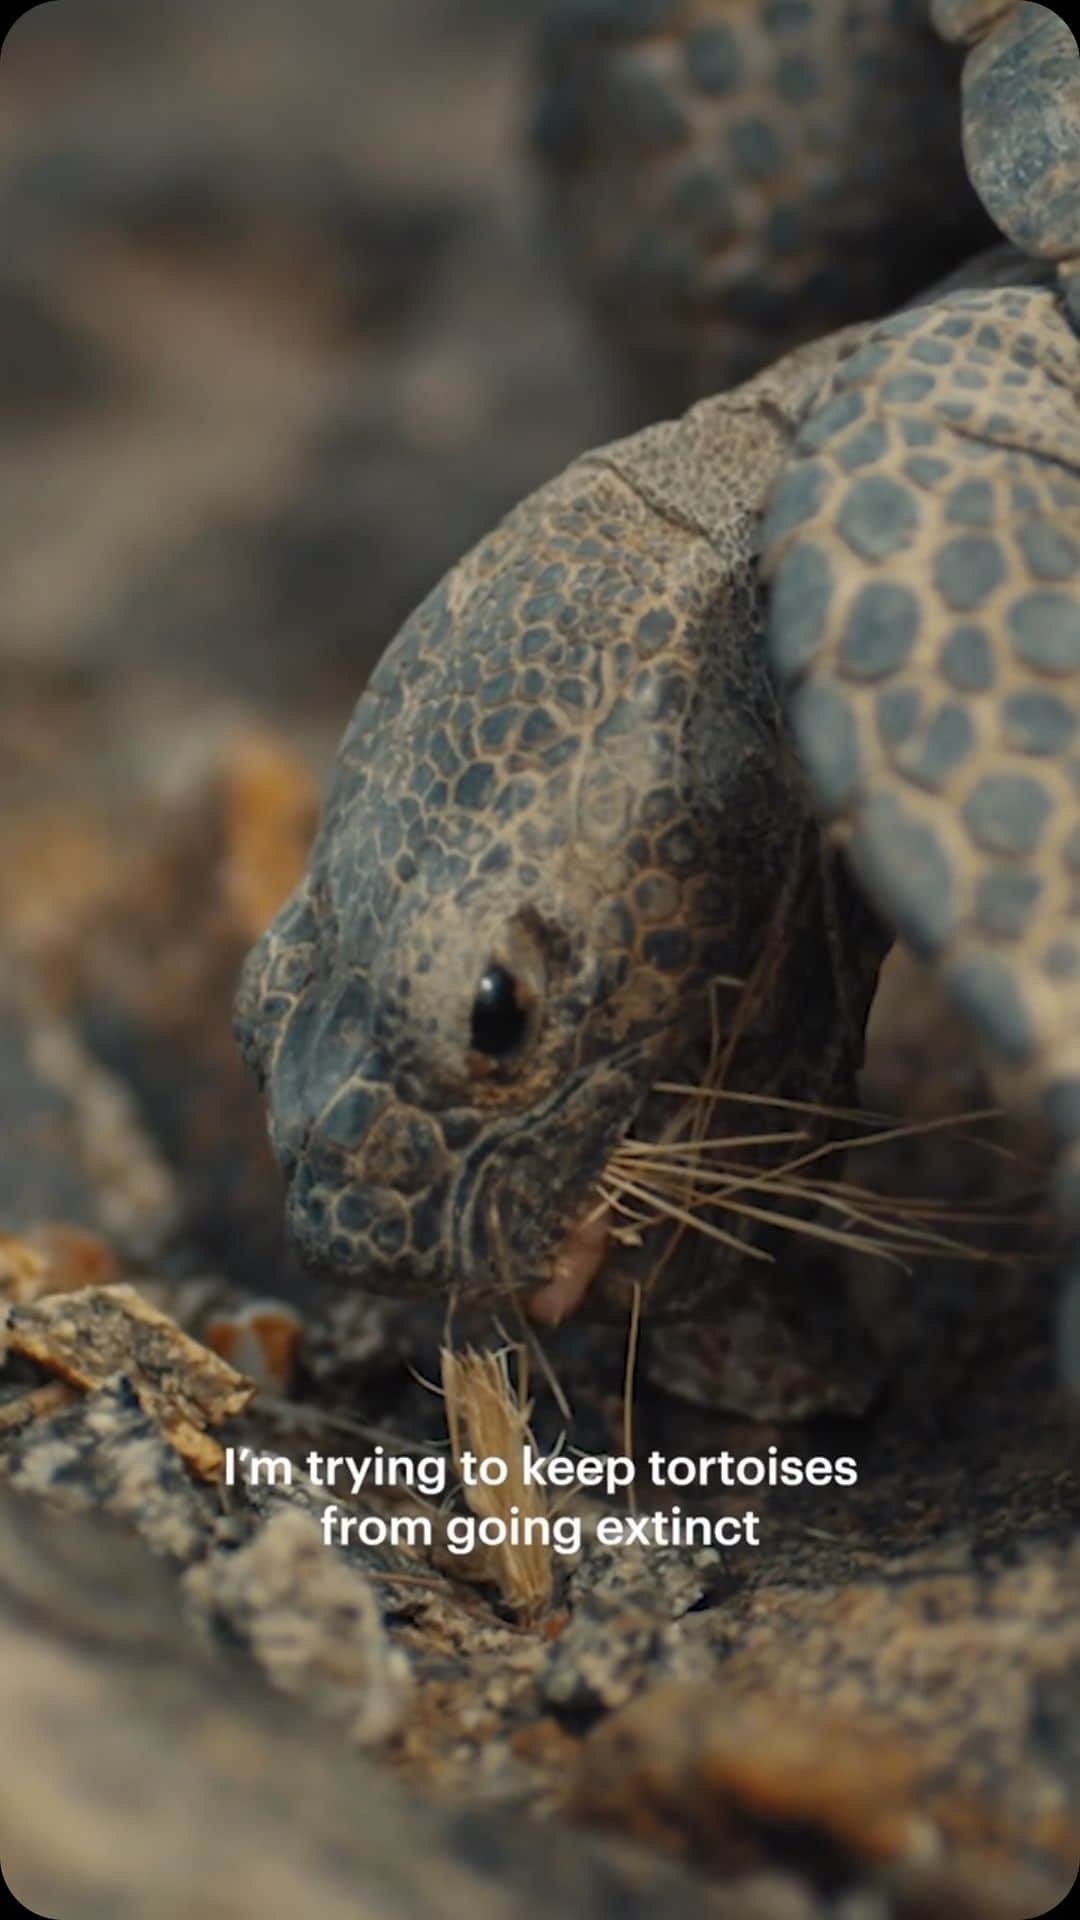 The New Yorkerのインスタグラム：「It’s estimated that the desert tortoise has roamed the area in and around the Mojave Desert for more than 15 million years. Within the past century, their existence has been threatened by climate change, habitat loss, and a peculiar import that arrived with human encroachment—ravens. A conservation biologist and a Mojave native have come up with a novel approach to mitigate the problem: booby-trapping the desert to train the ravens to leave the tortoises alone. The short documentary “Eco-Hack!,” by @brettmarty and @onlyhumanfilm, follows their experiment. Watch it in full at the link in our bio.」